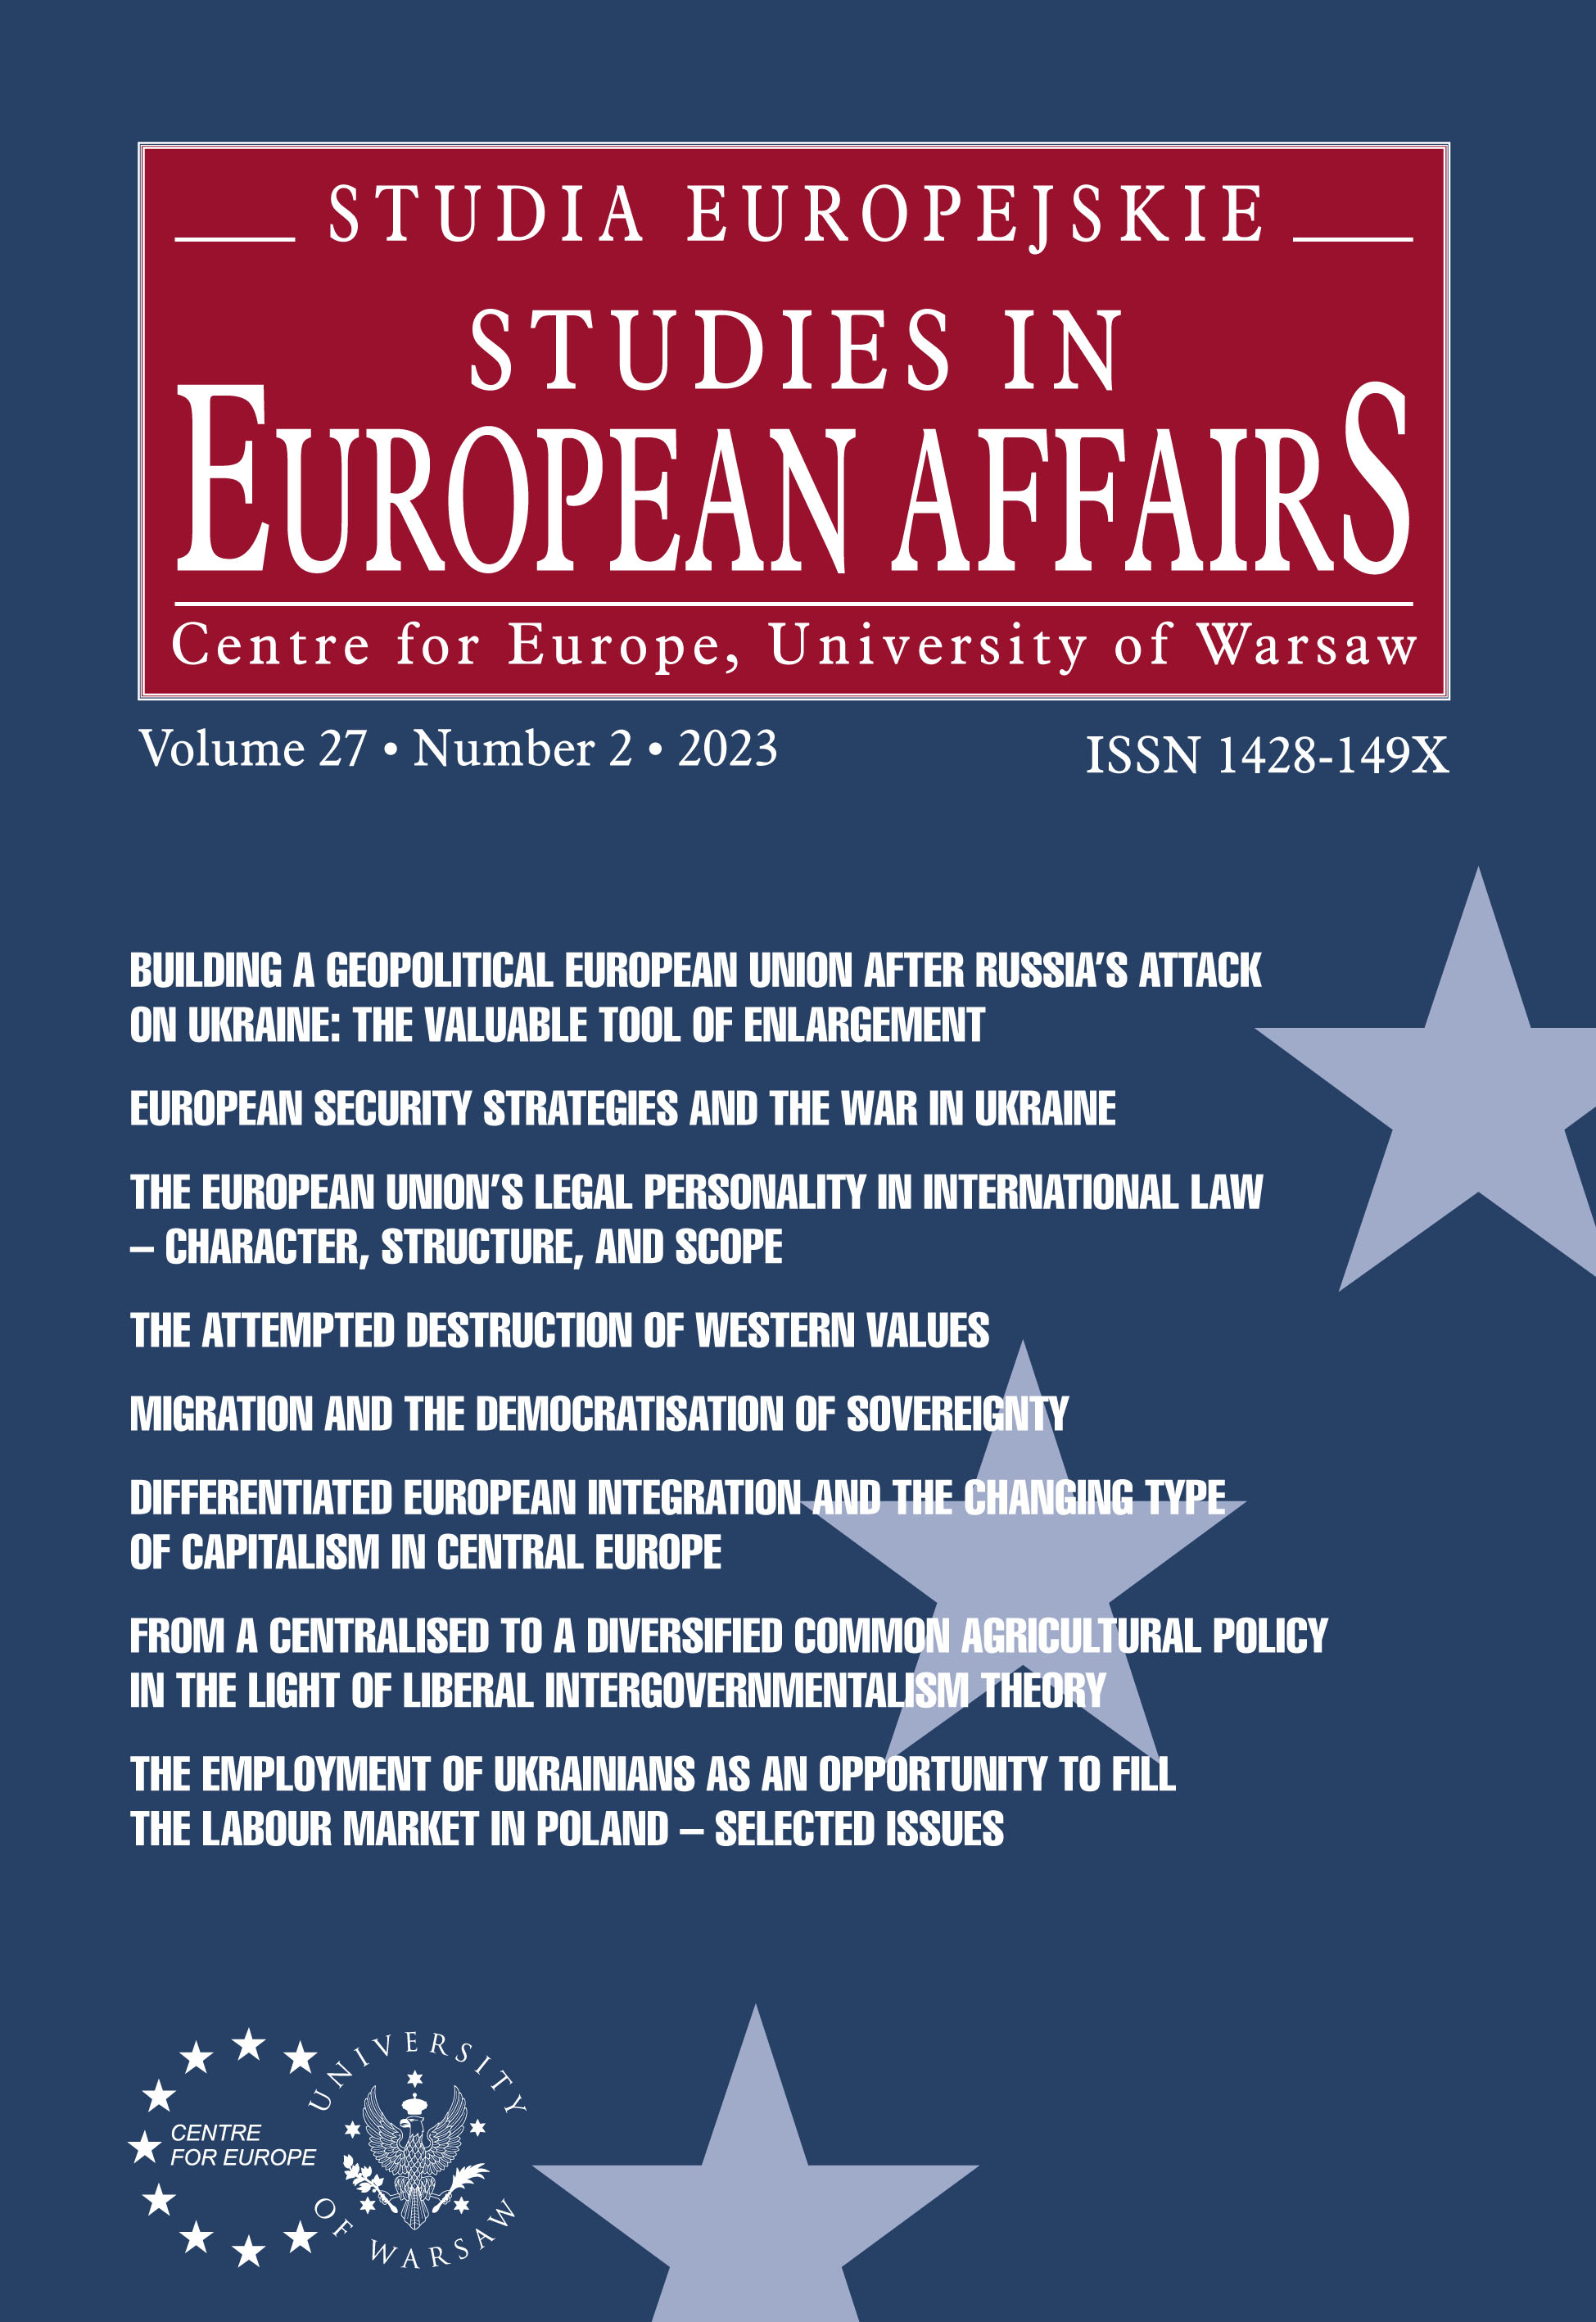 Differentiated European Integration and the Changing Type of Capitalism in Central Europe Cover Image